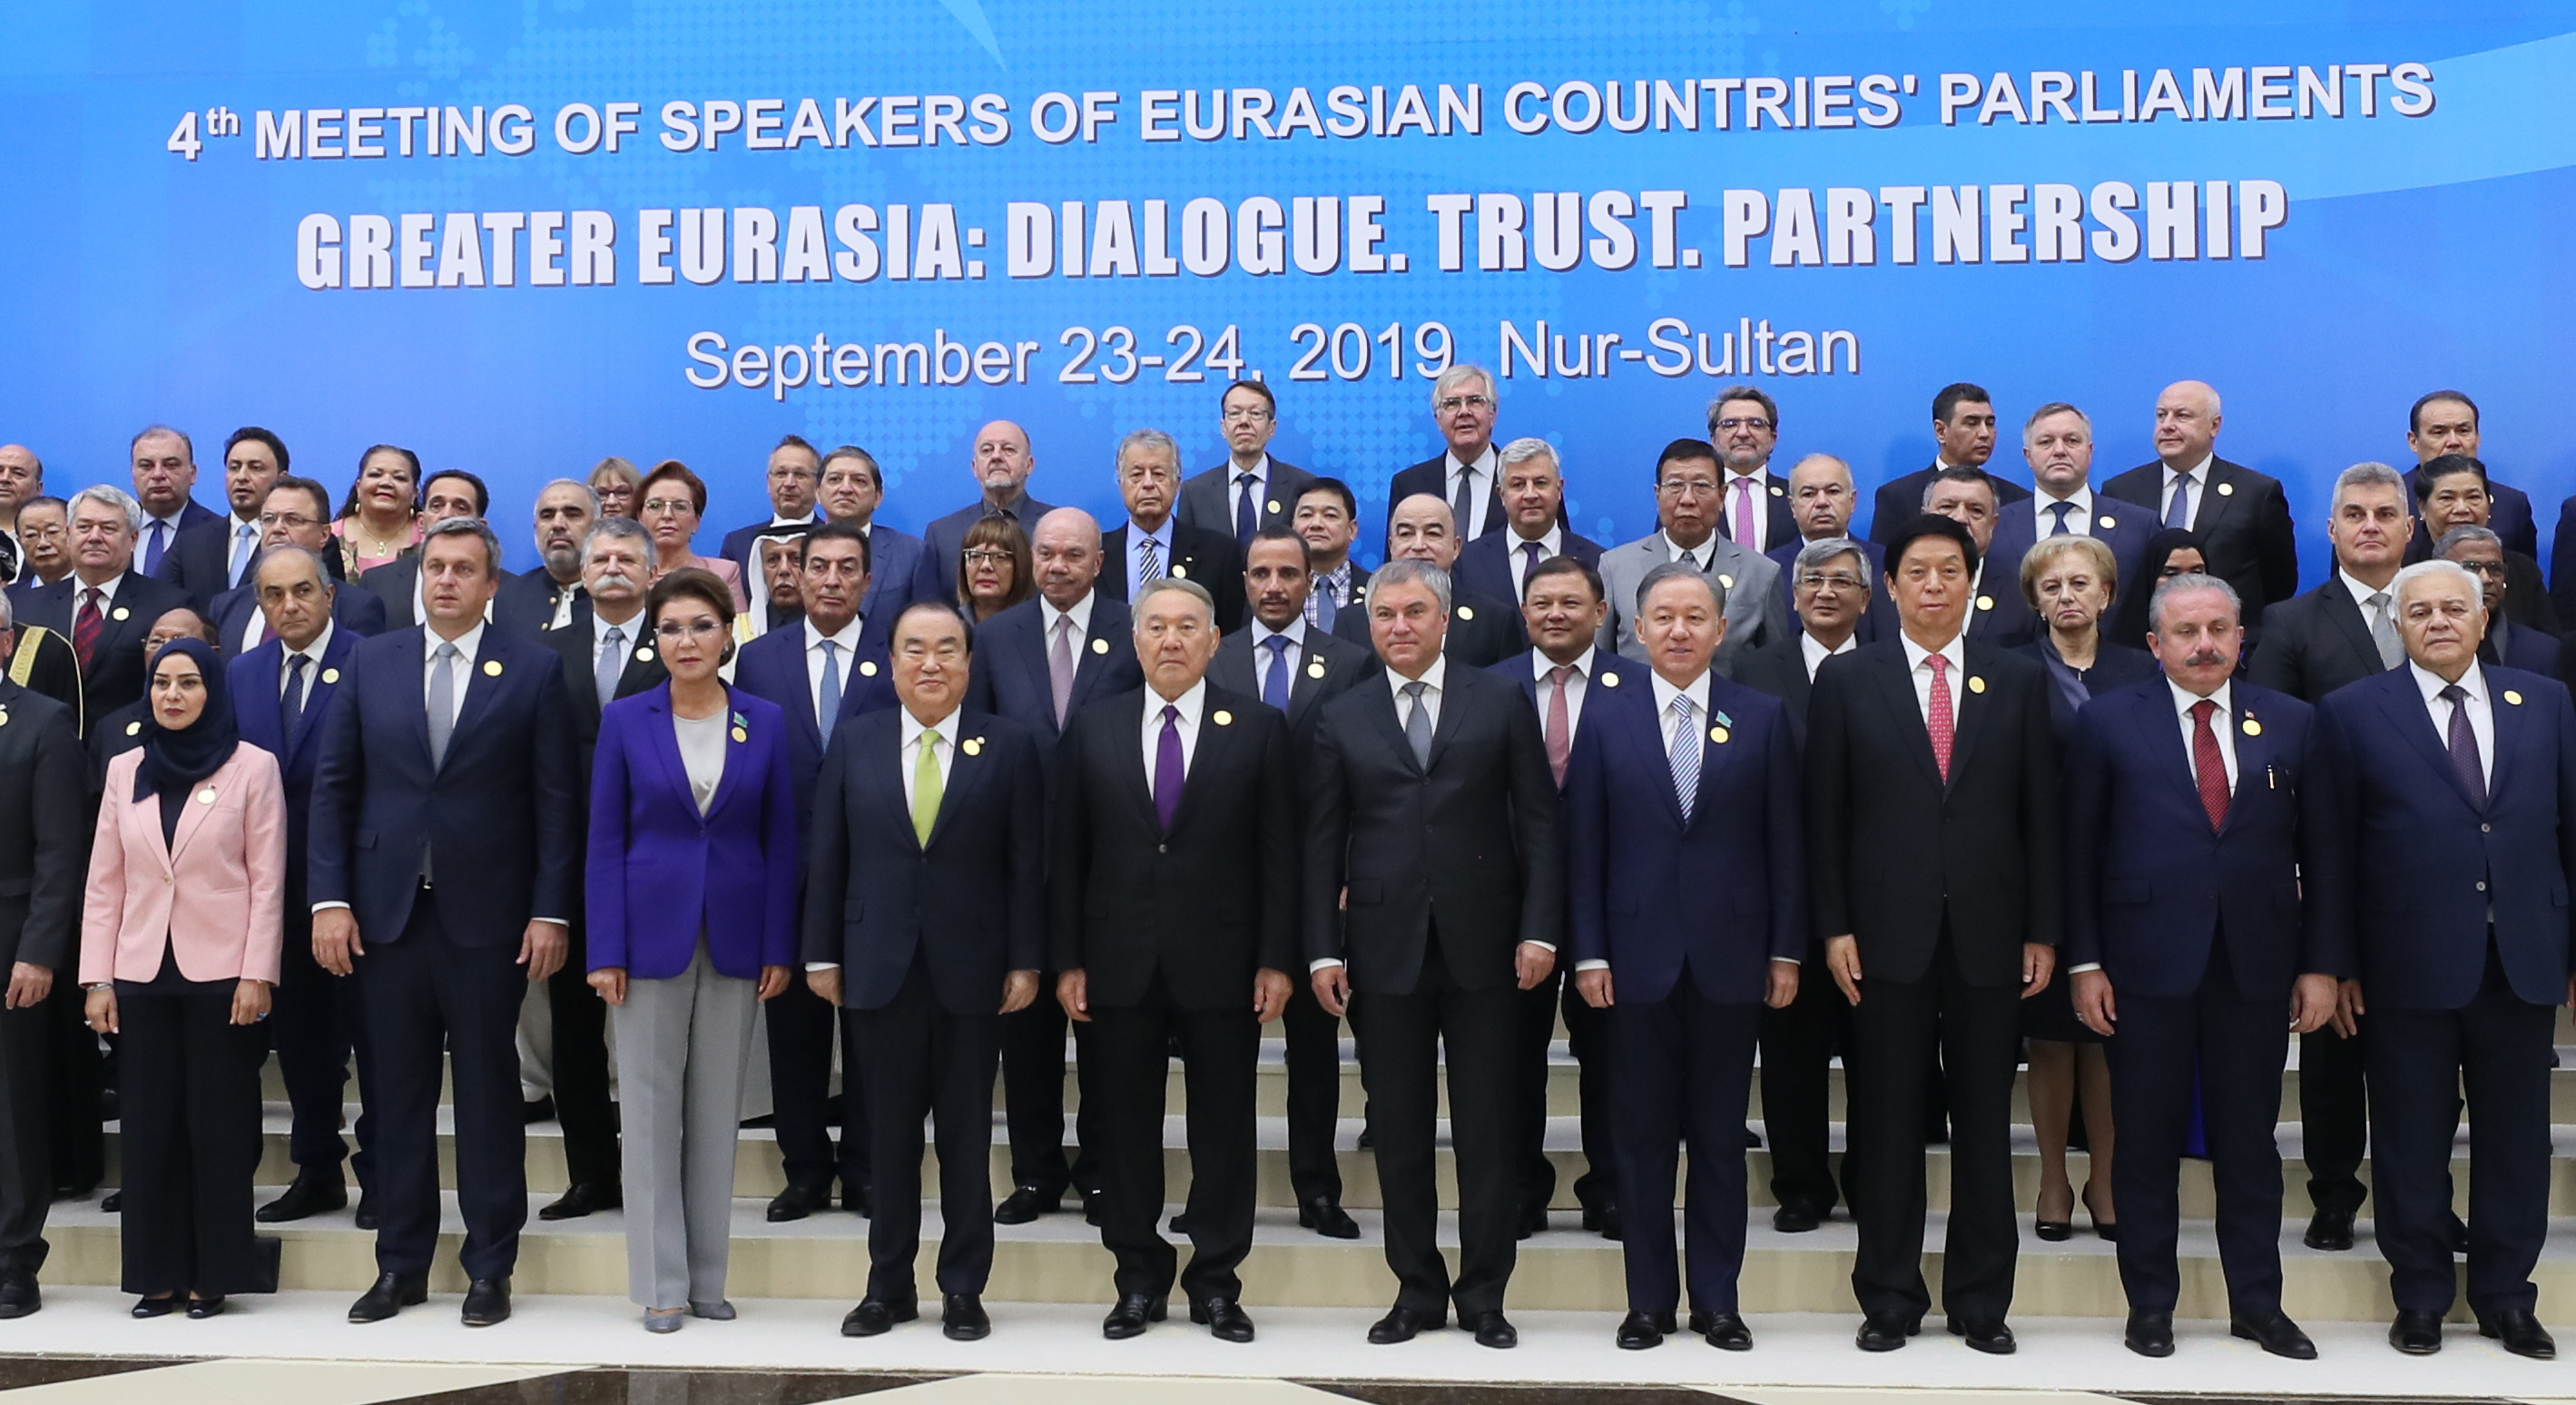 [Sep 27] Overview of the 4th Meeting of Speakers of Eurasian Countries’ Parliaments